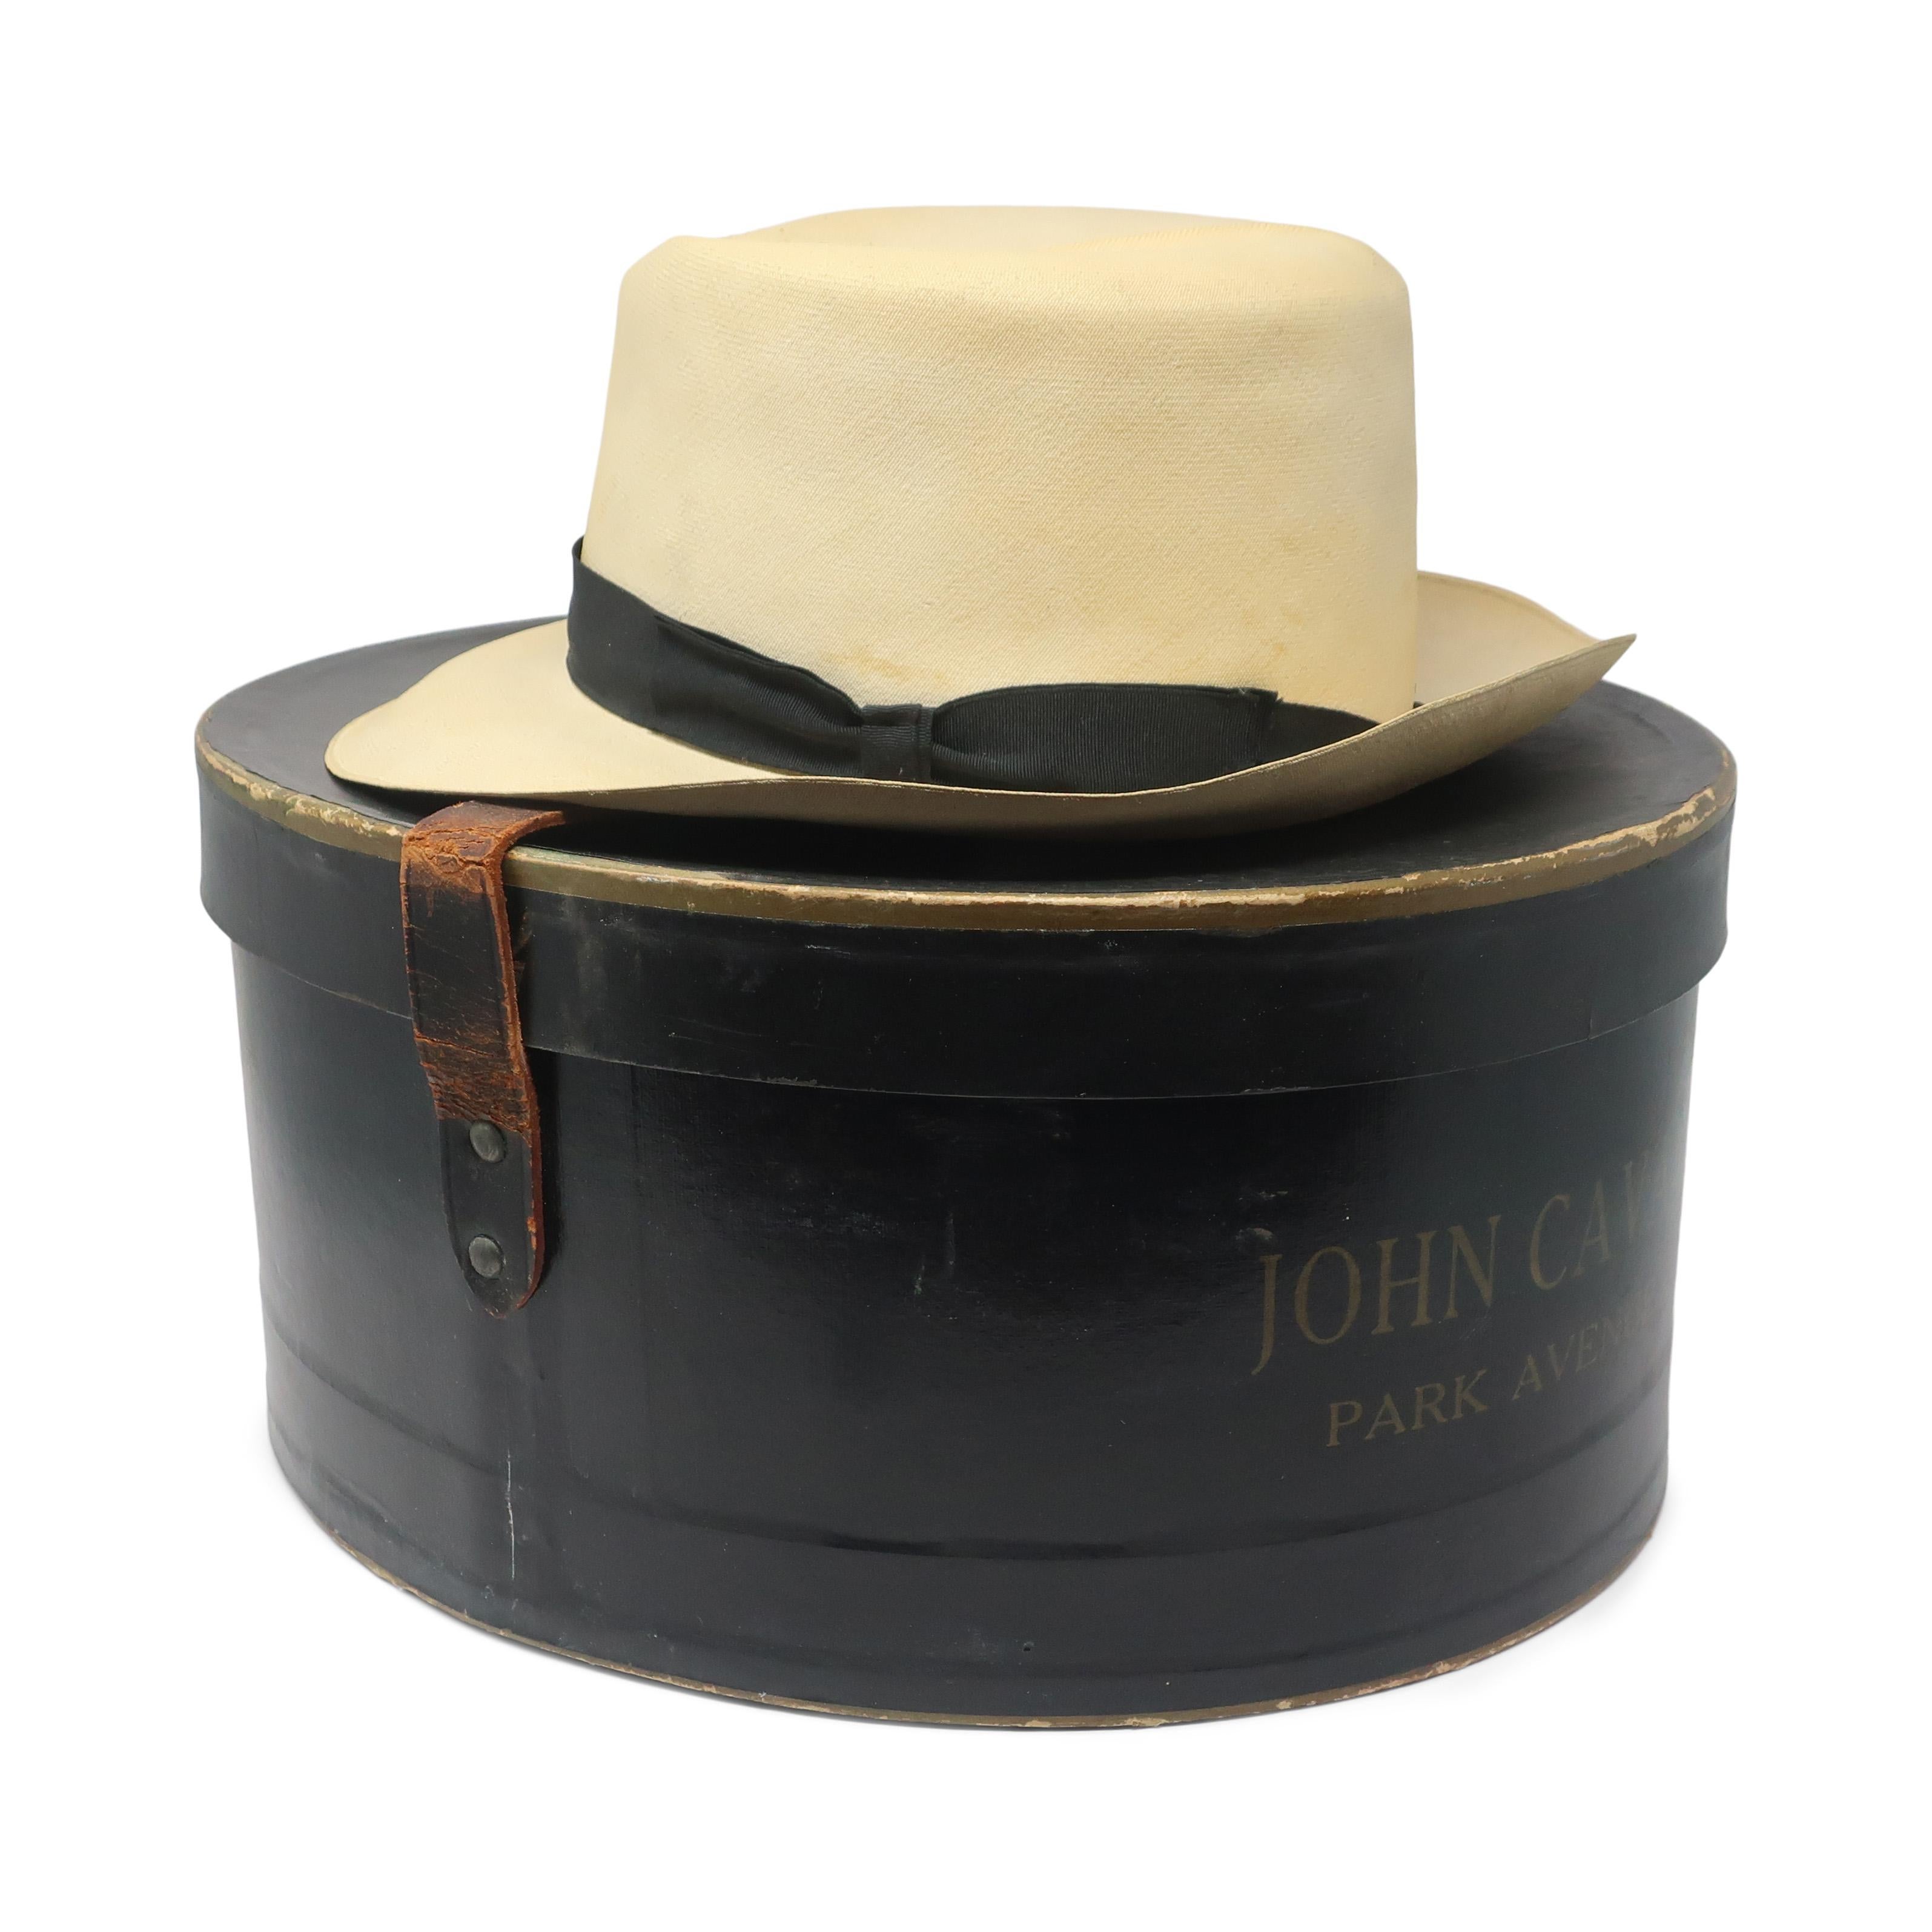 Look no further for a classic and elegant accessory than this vintage Panama hat by John Cavanagh, one of the most renowned hat-makers in American history who reshaped and influenced the design of men's dress hats for decades.  This hat is made of